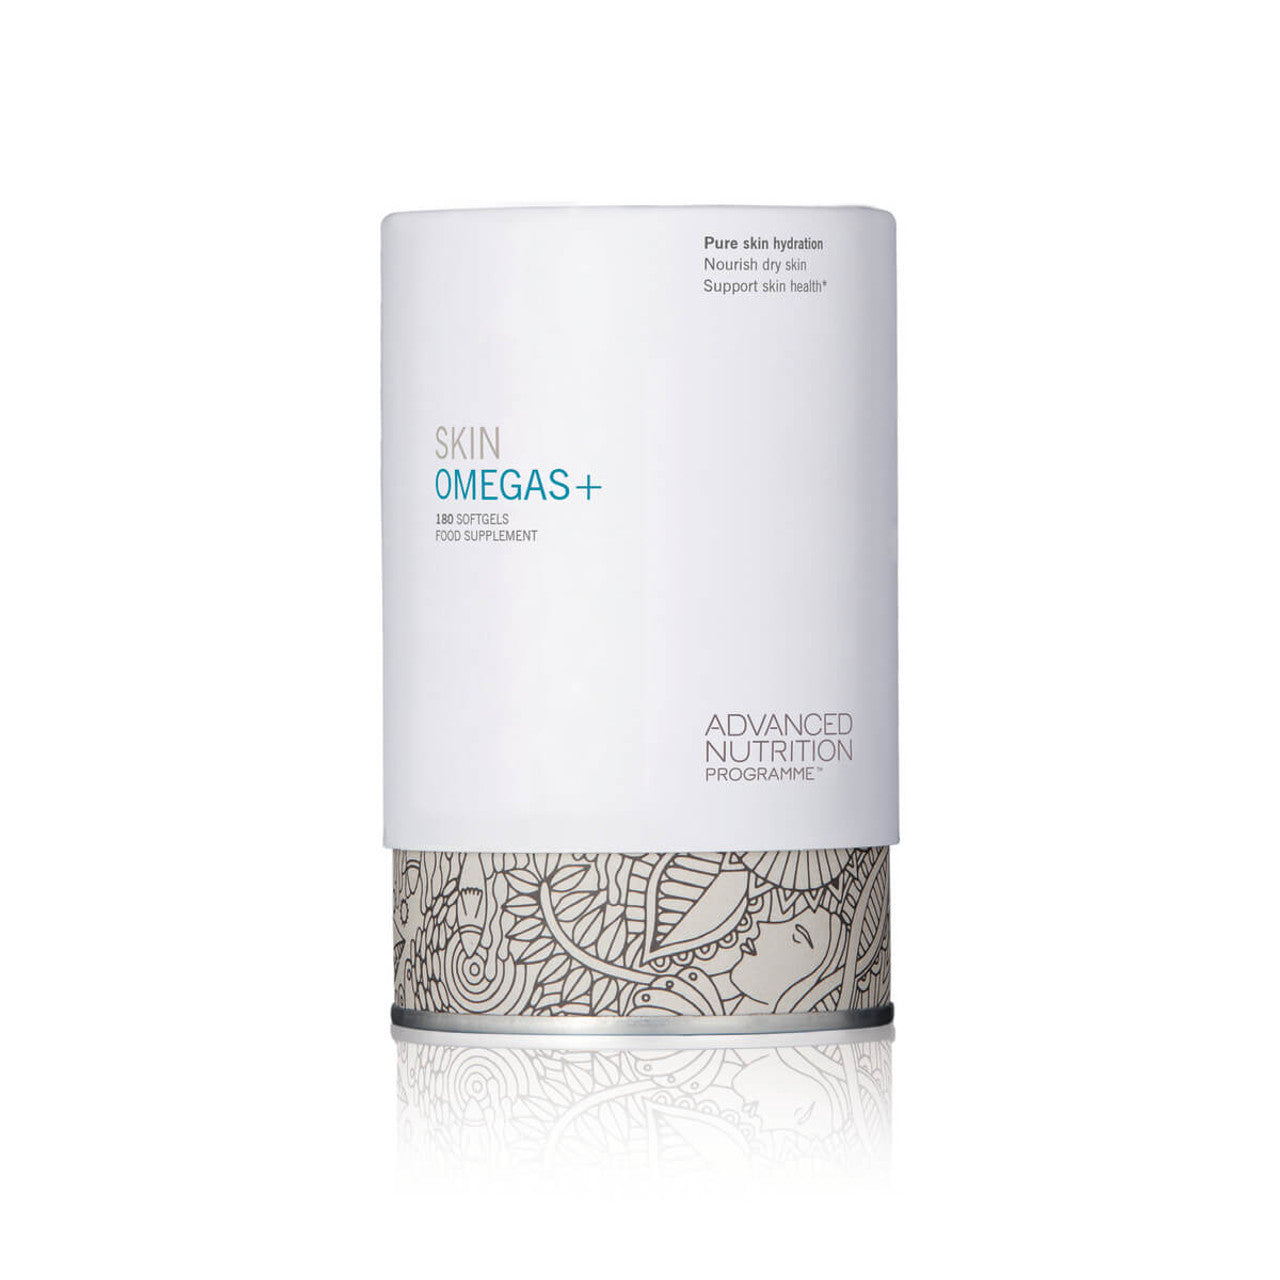 Advanced Nutrition Programme's Skin Omegas+ 180 capsules - $180.00 - Free Shipping for orders above $300.00